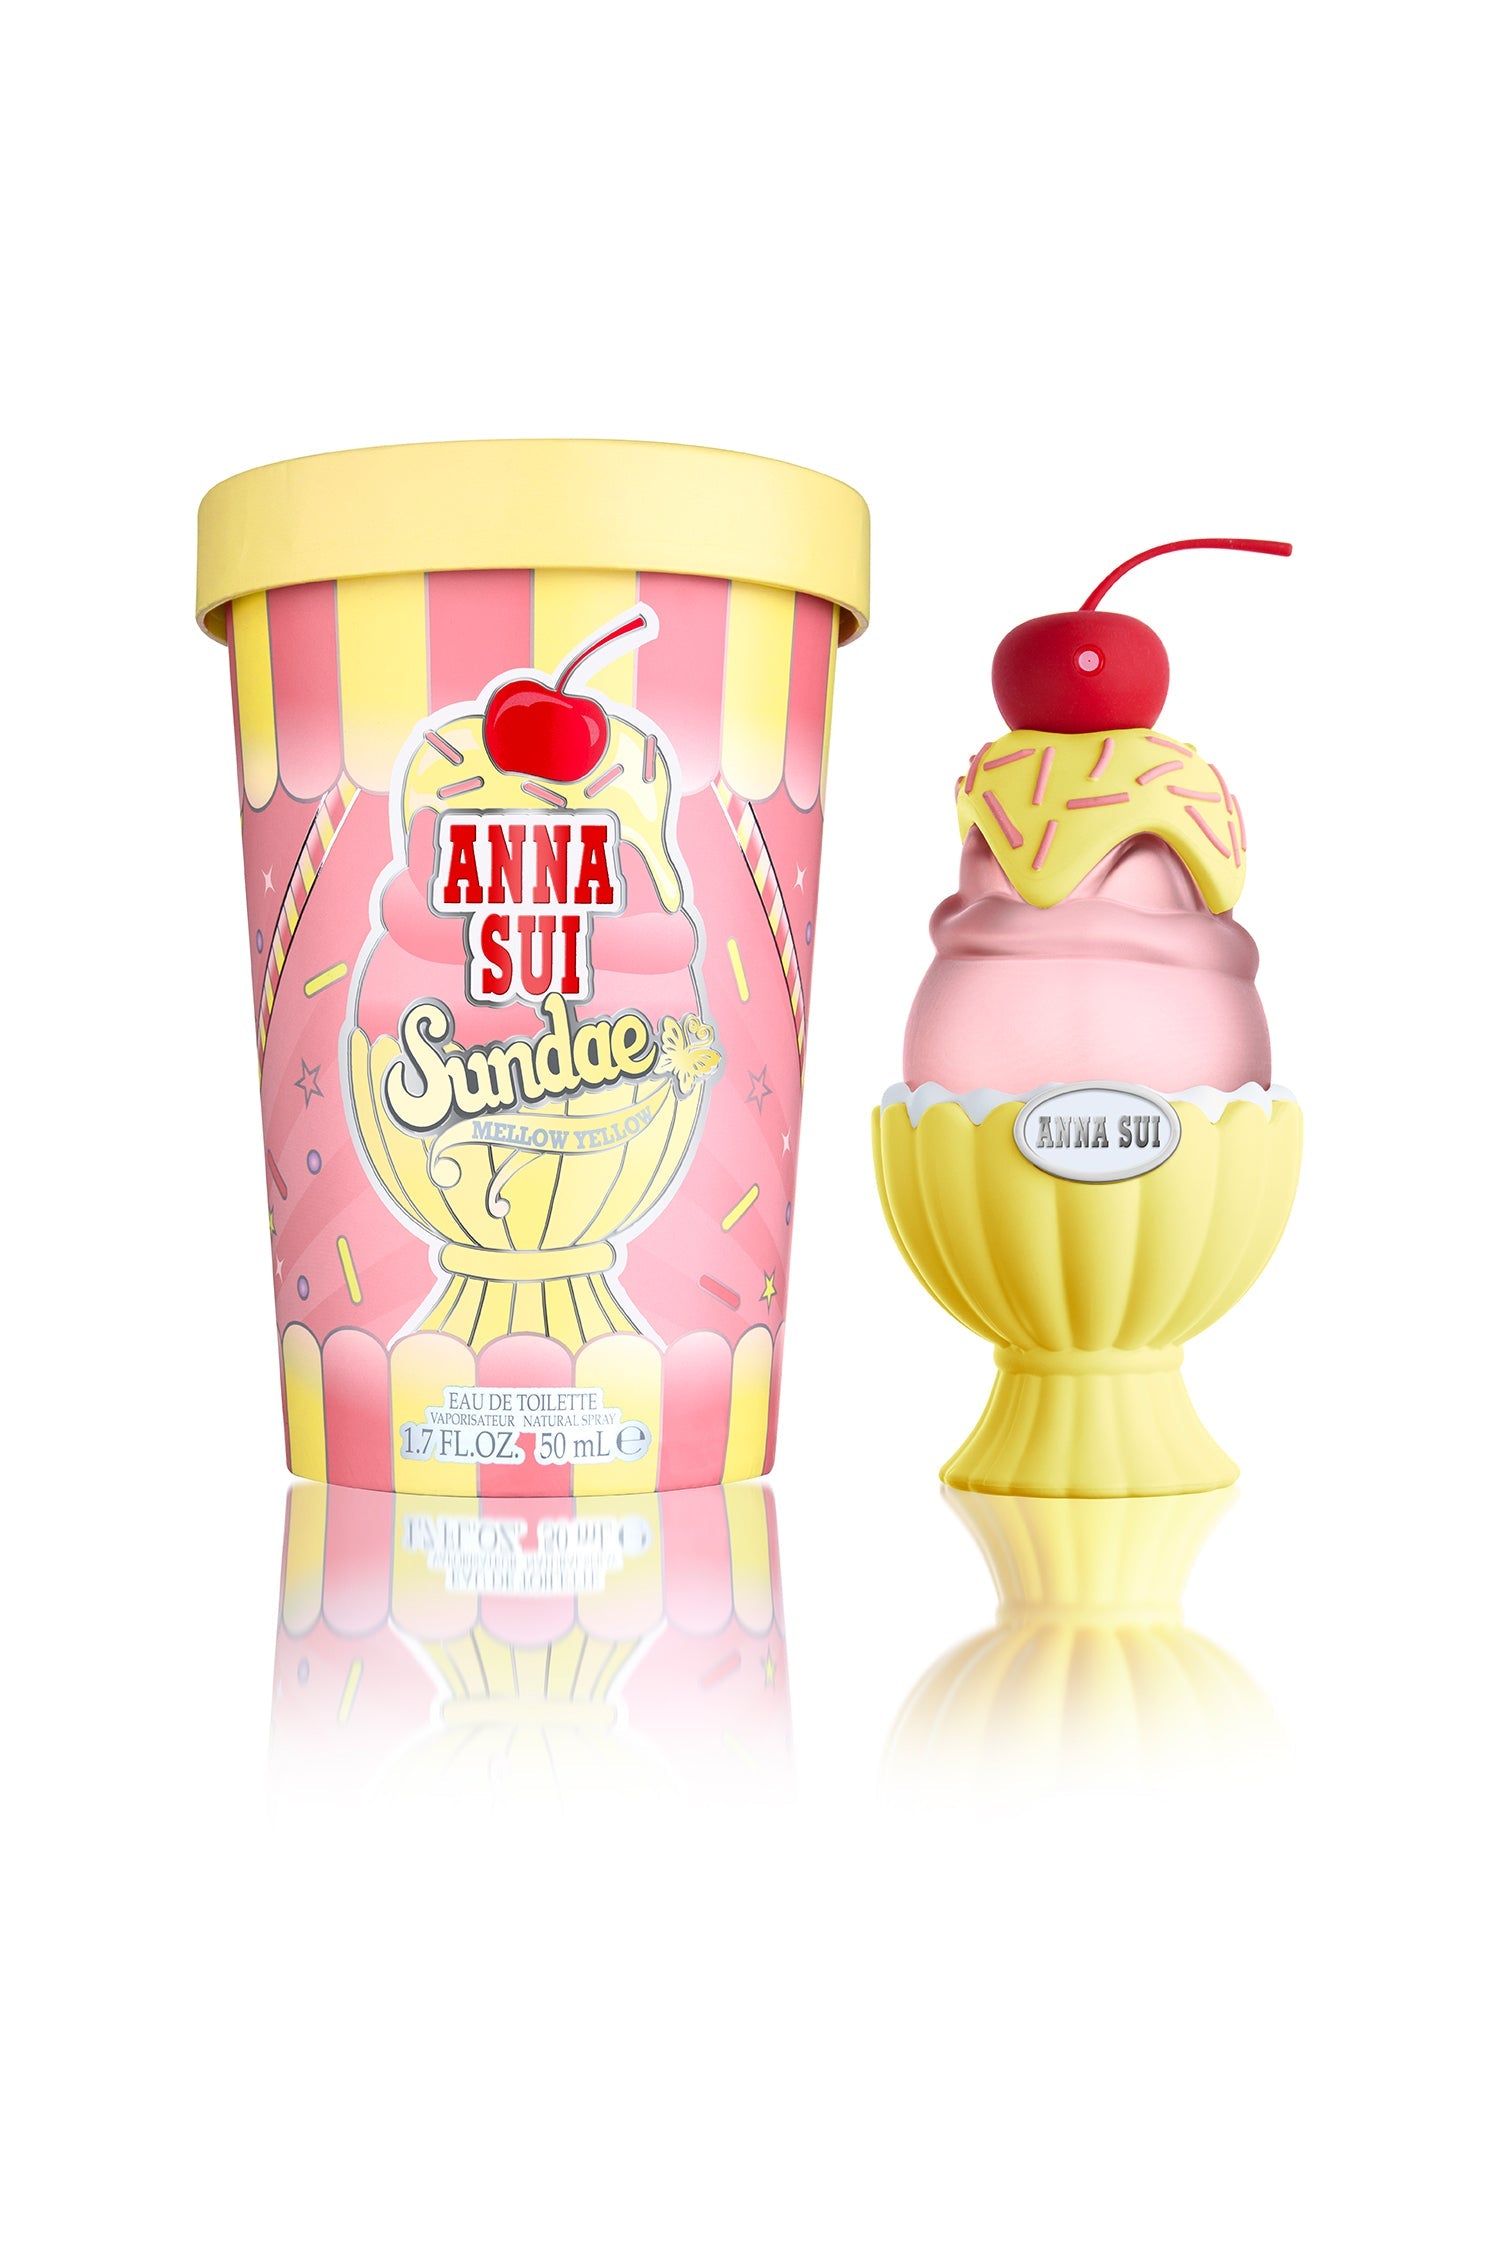 In a Yellow bottle with a shell design, pink ice cream-shaped, cherry cap, packaged in popcorn box